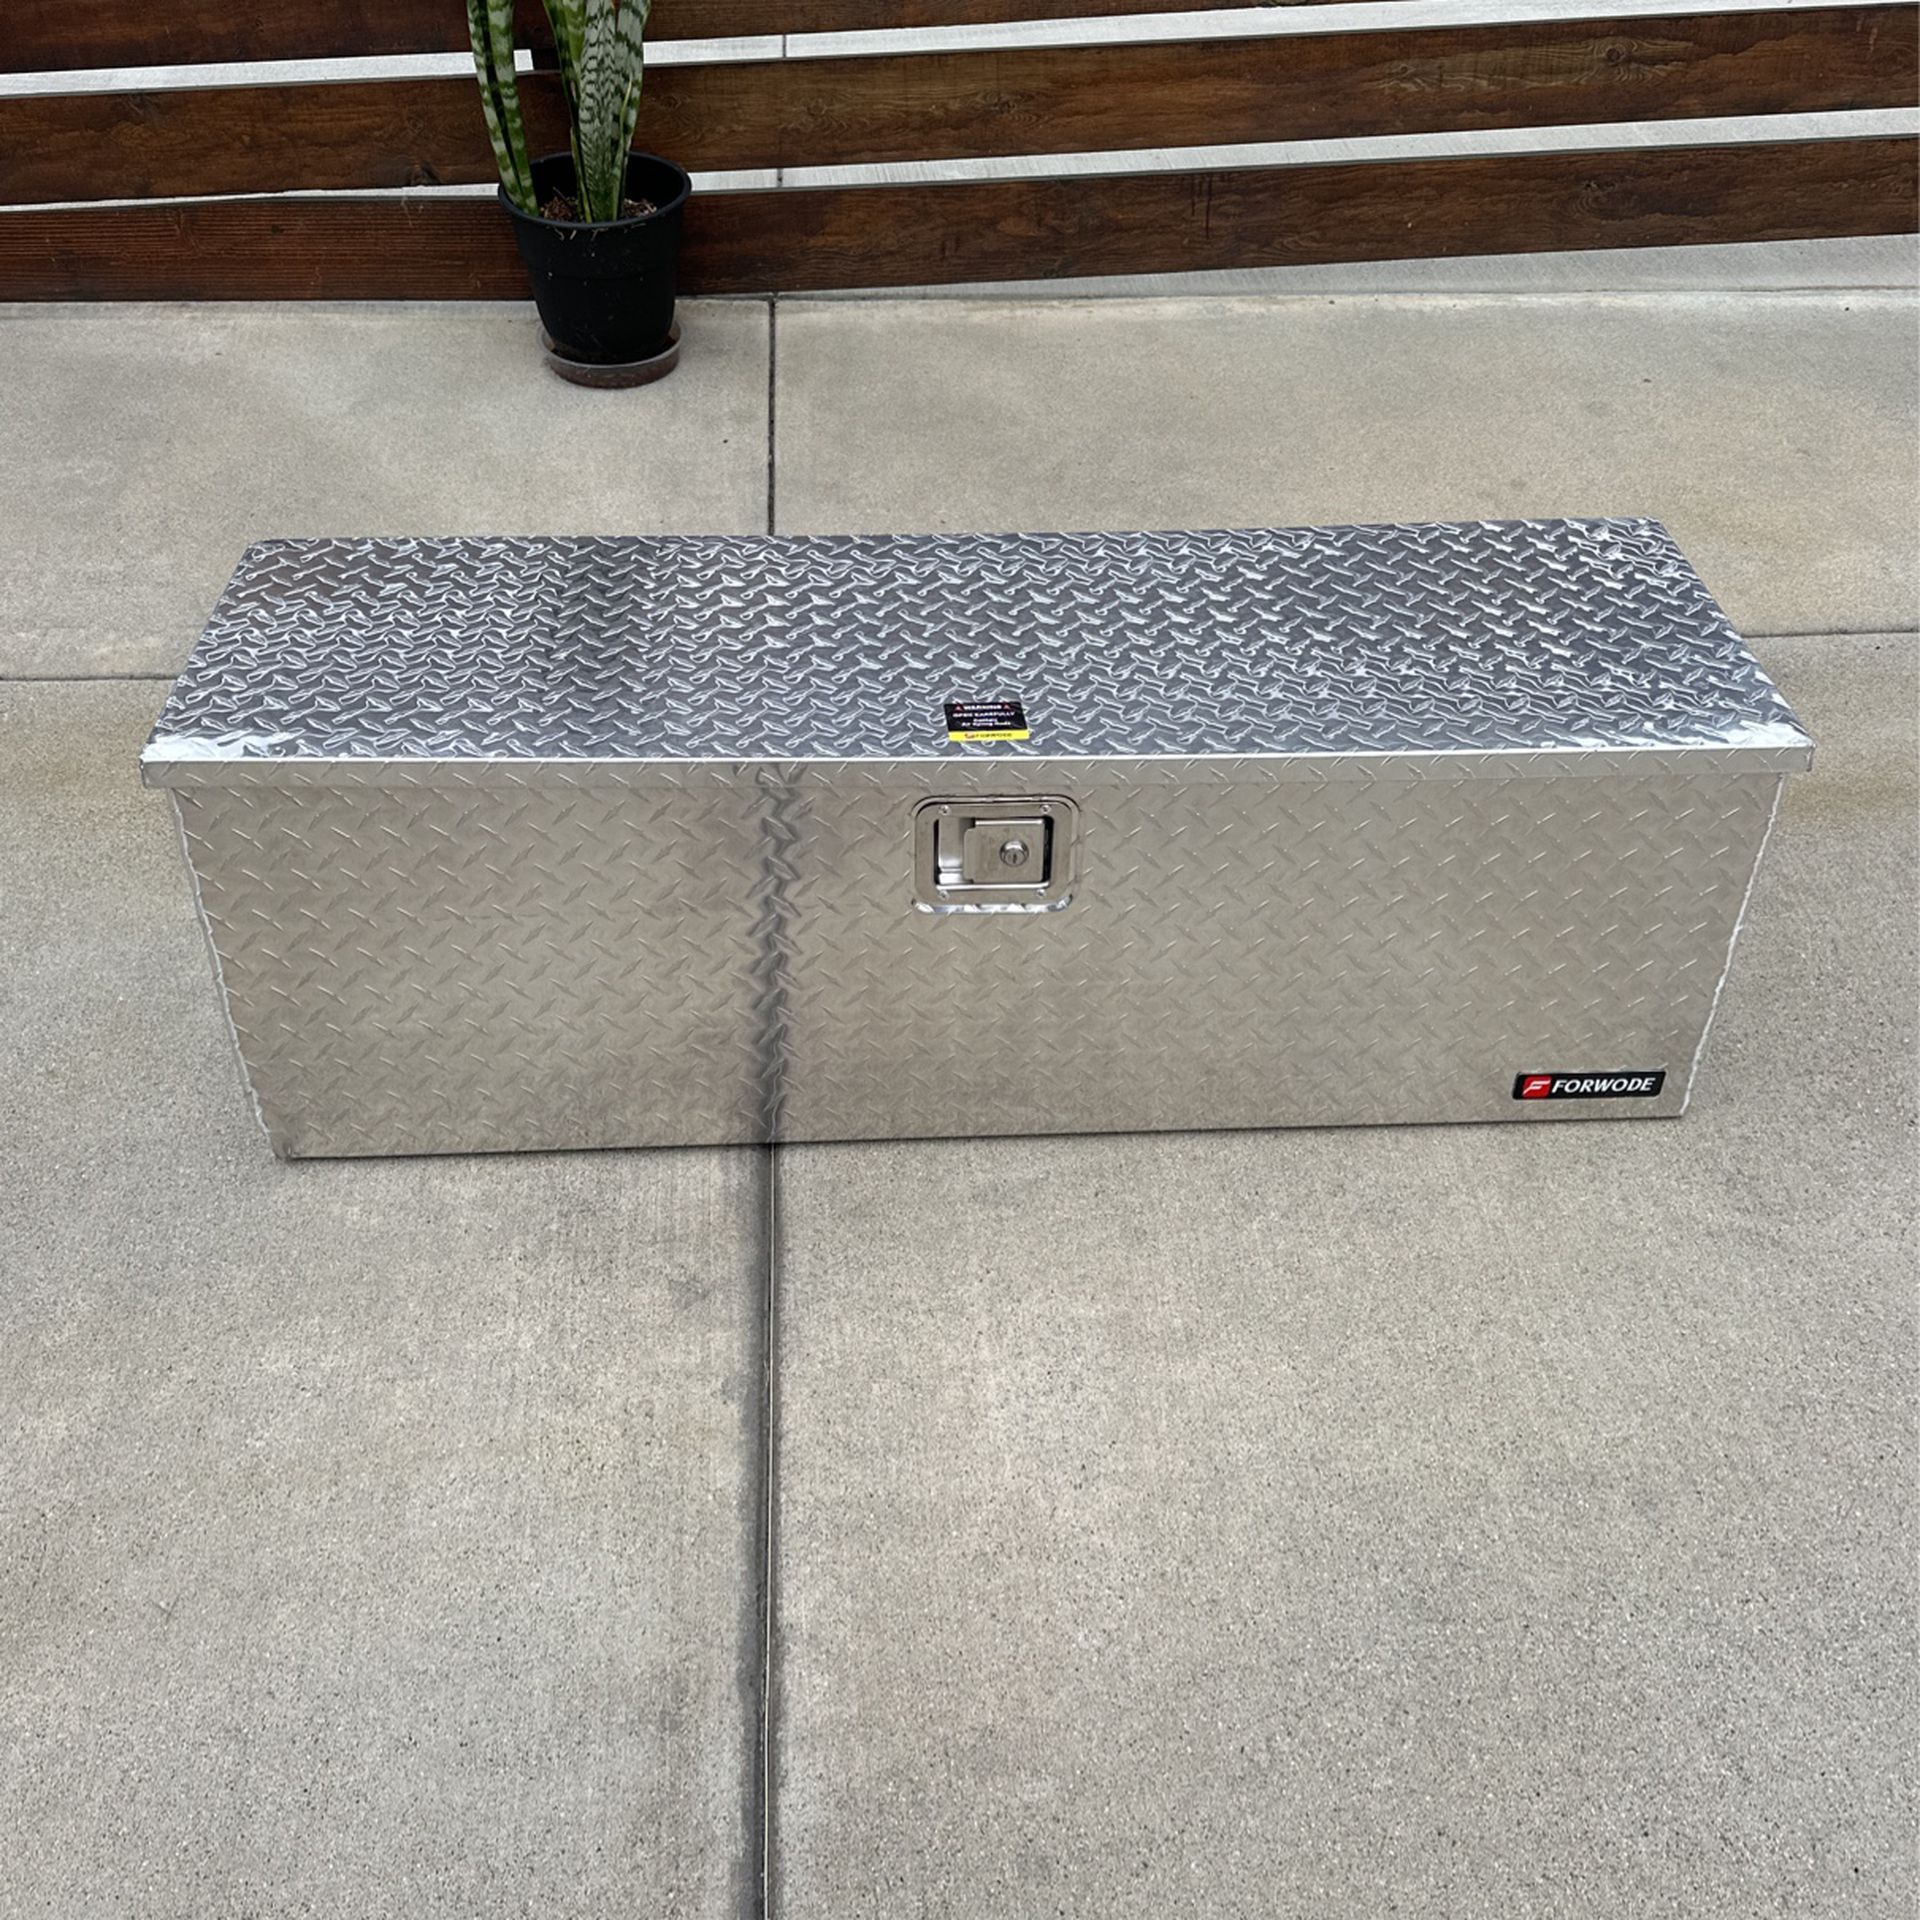 Brand New Tool Box Never Used 